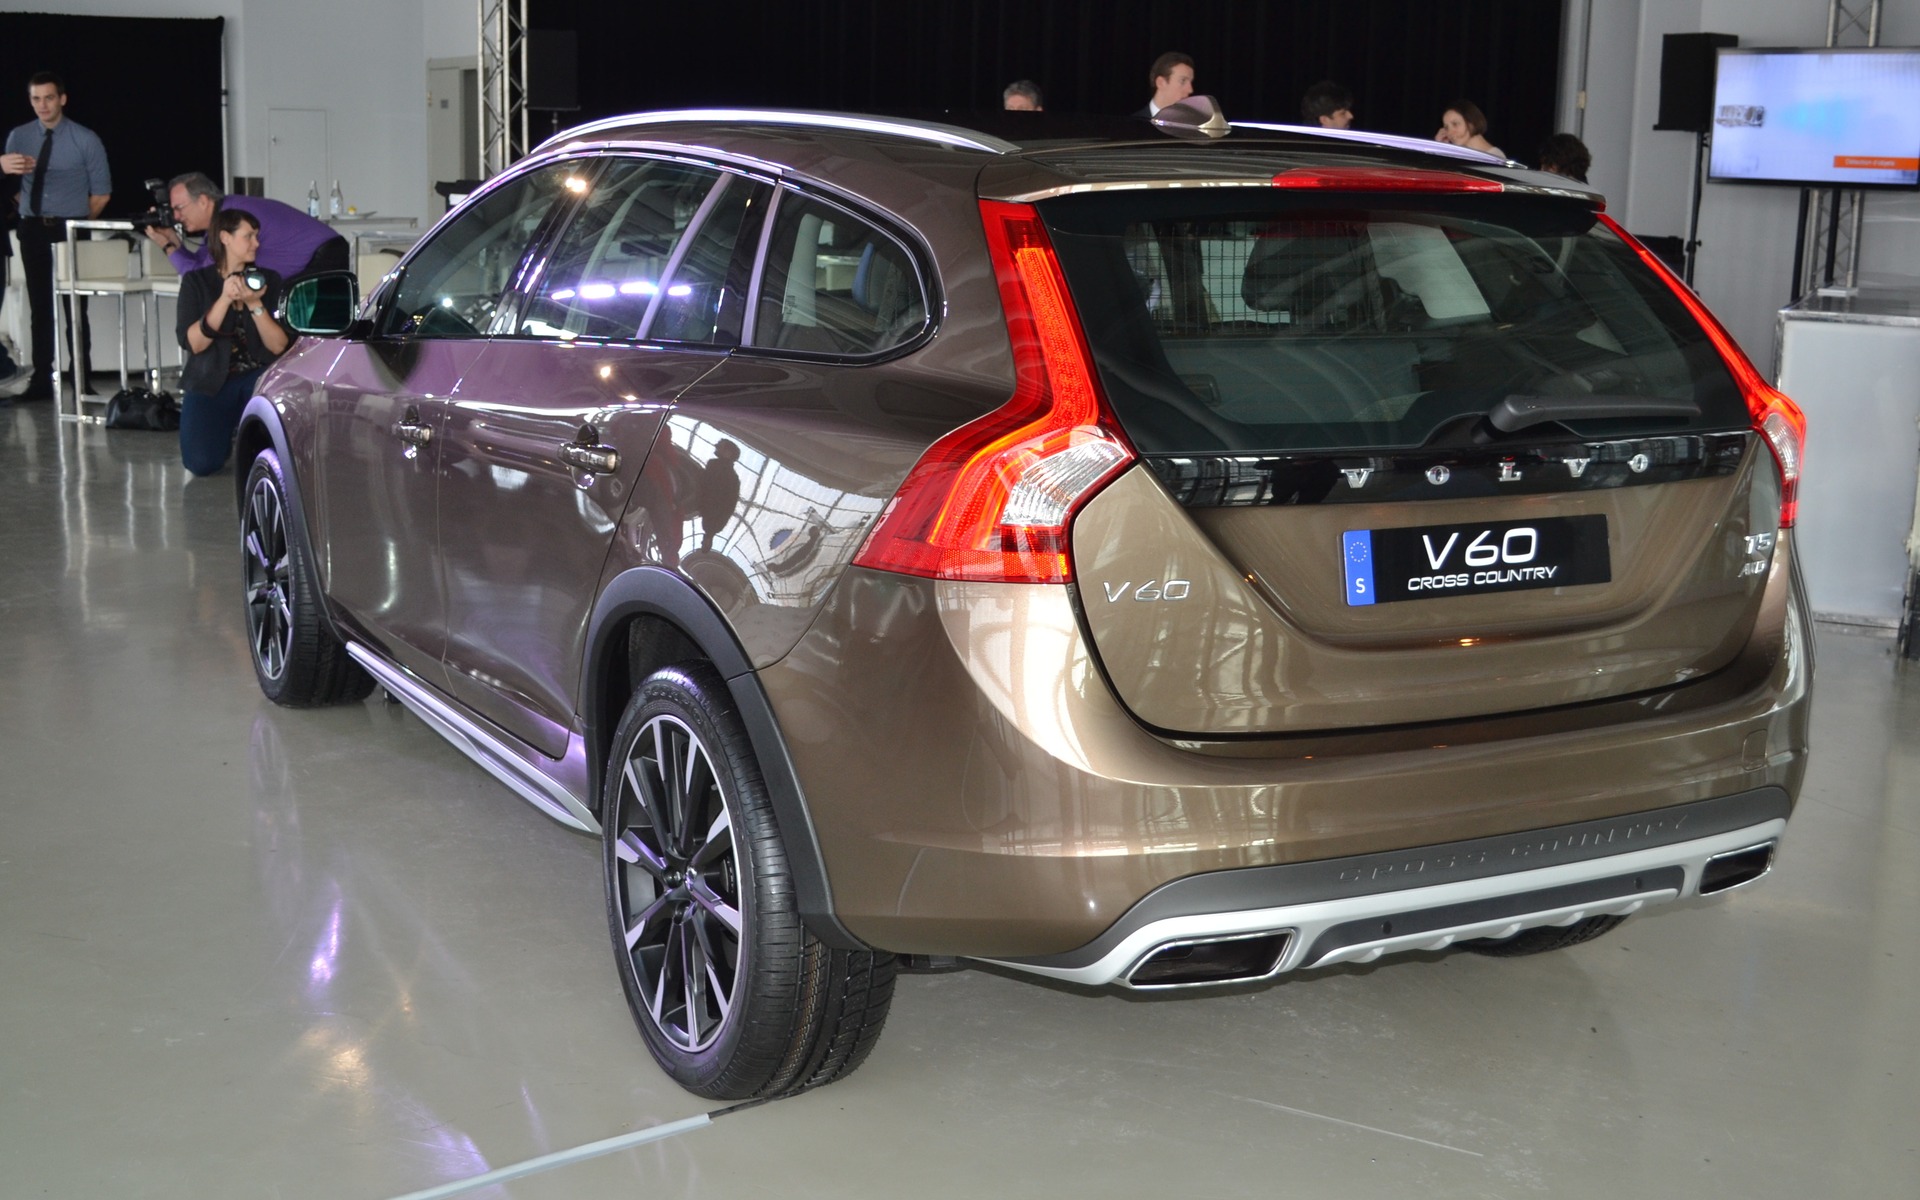 Volvo Introduces The New 2016 XC90 And V60 Cross Country ...